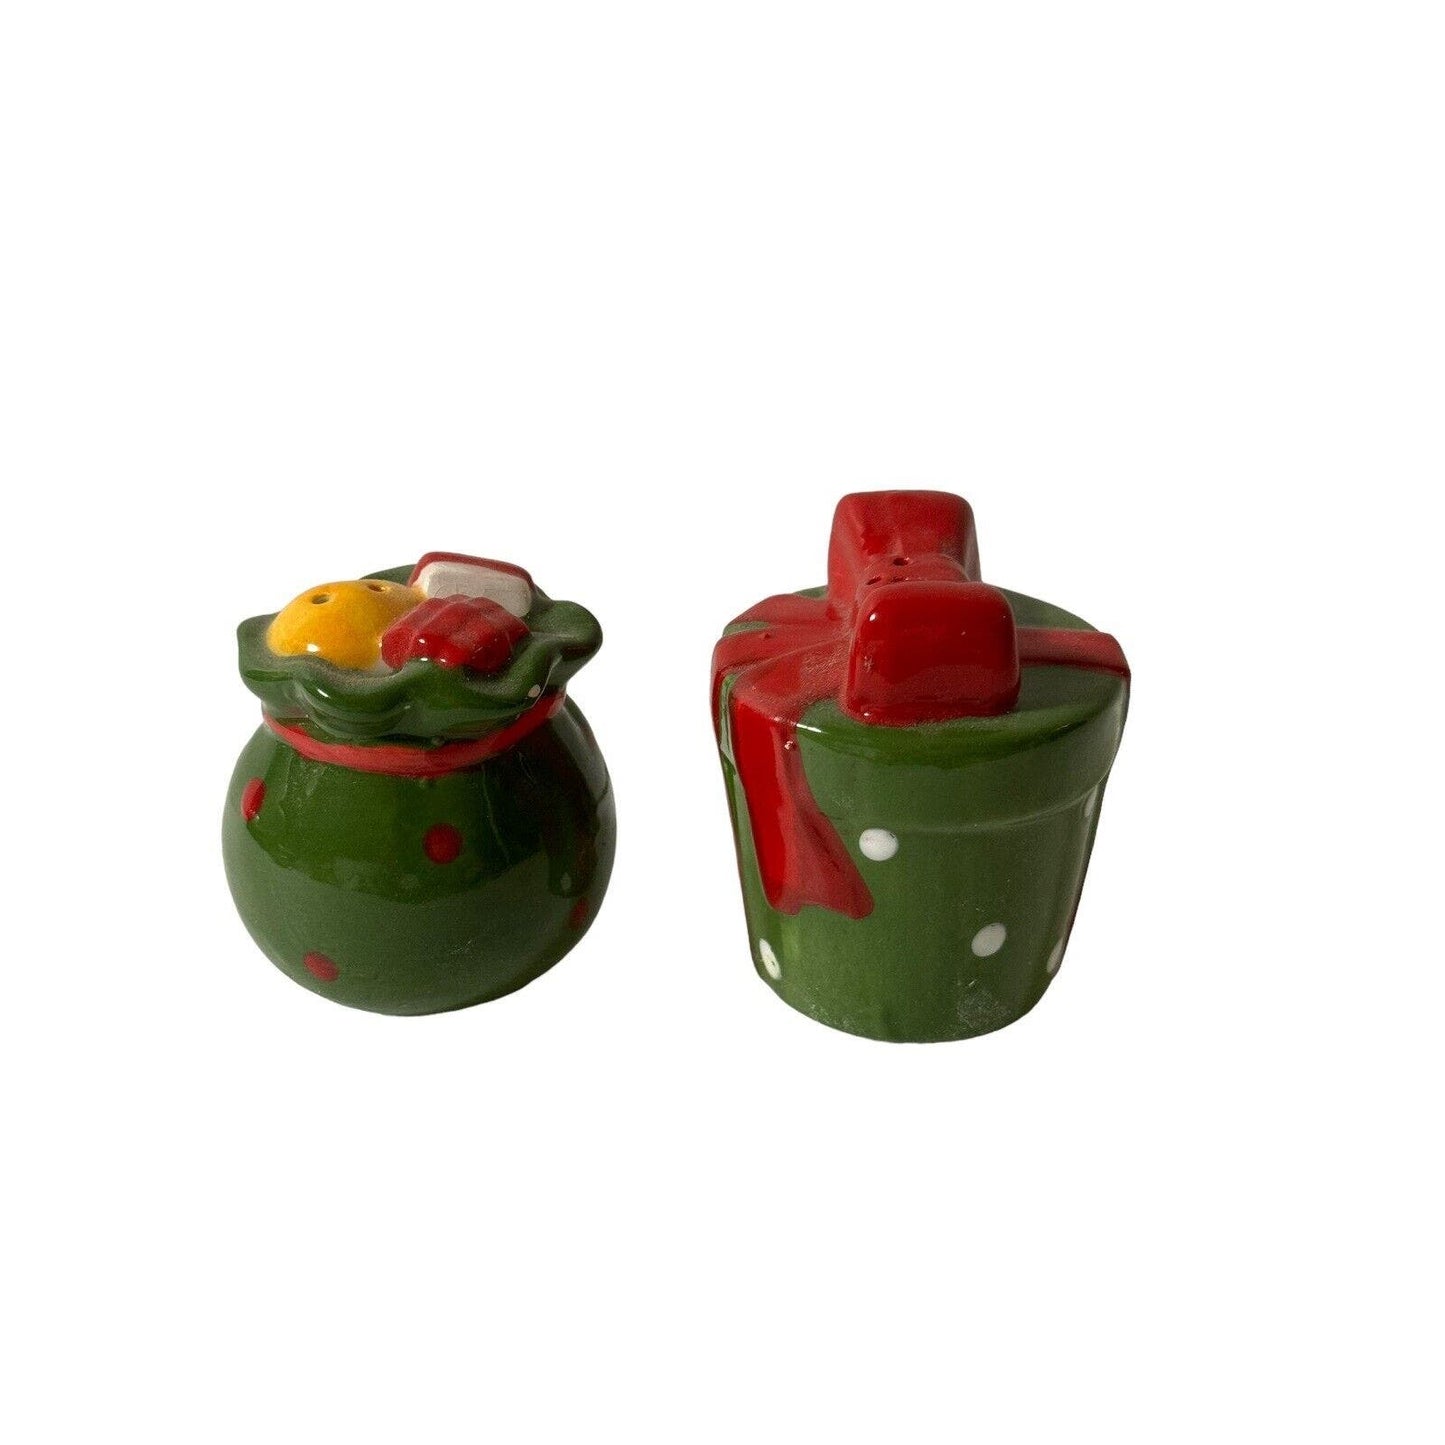 Christmas Presents Sack For Of Presents Ceramic Salt And Pepper Shakers 2”